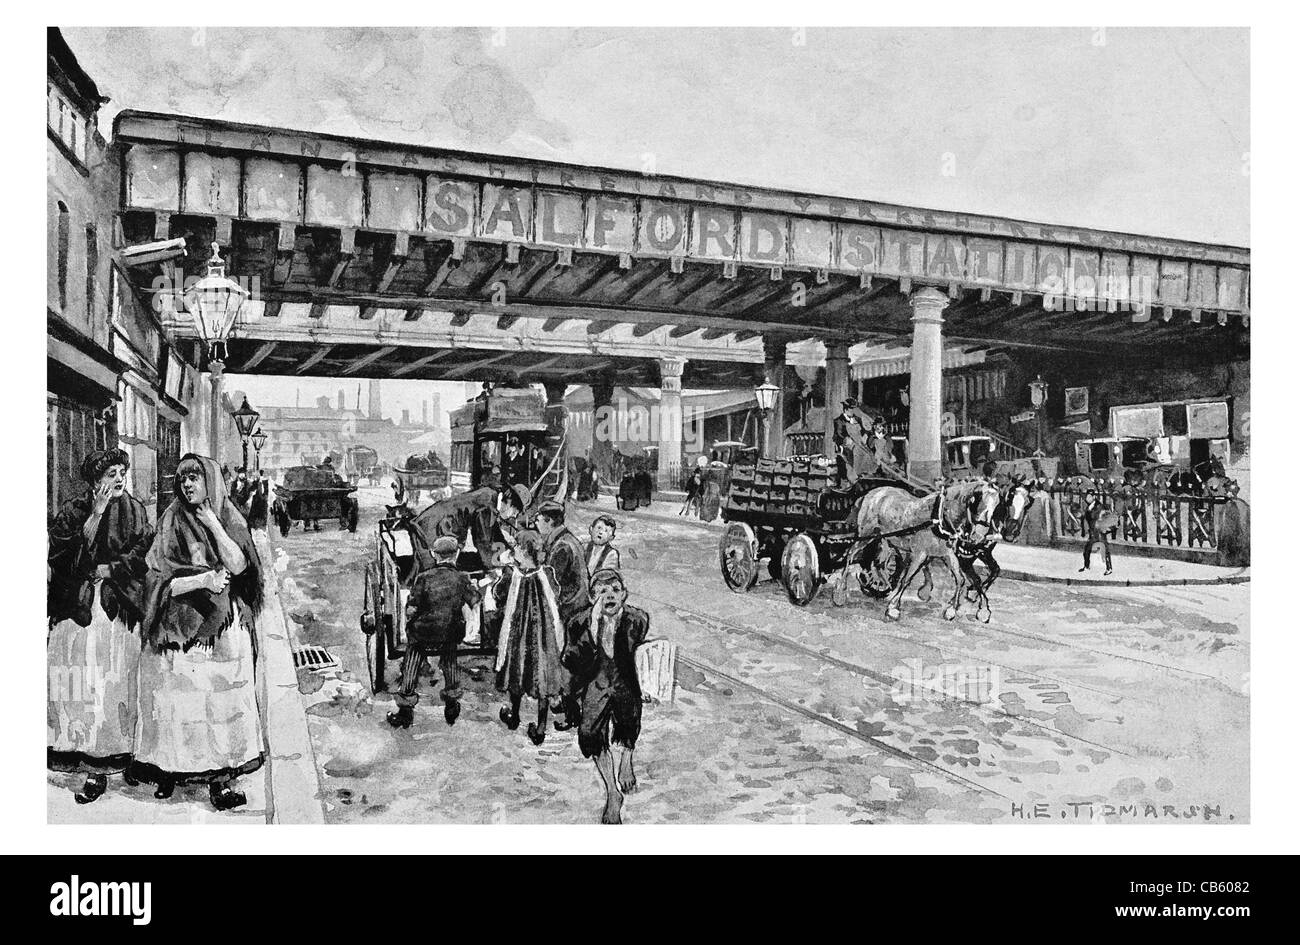 New Bailey Street Salford Central railway station Northern Rail horse drawn carriage Stock Photo